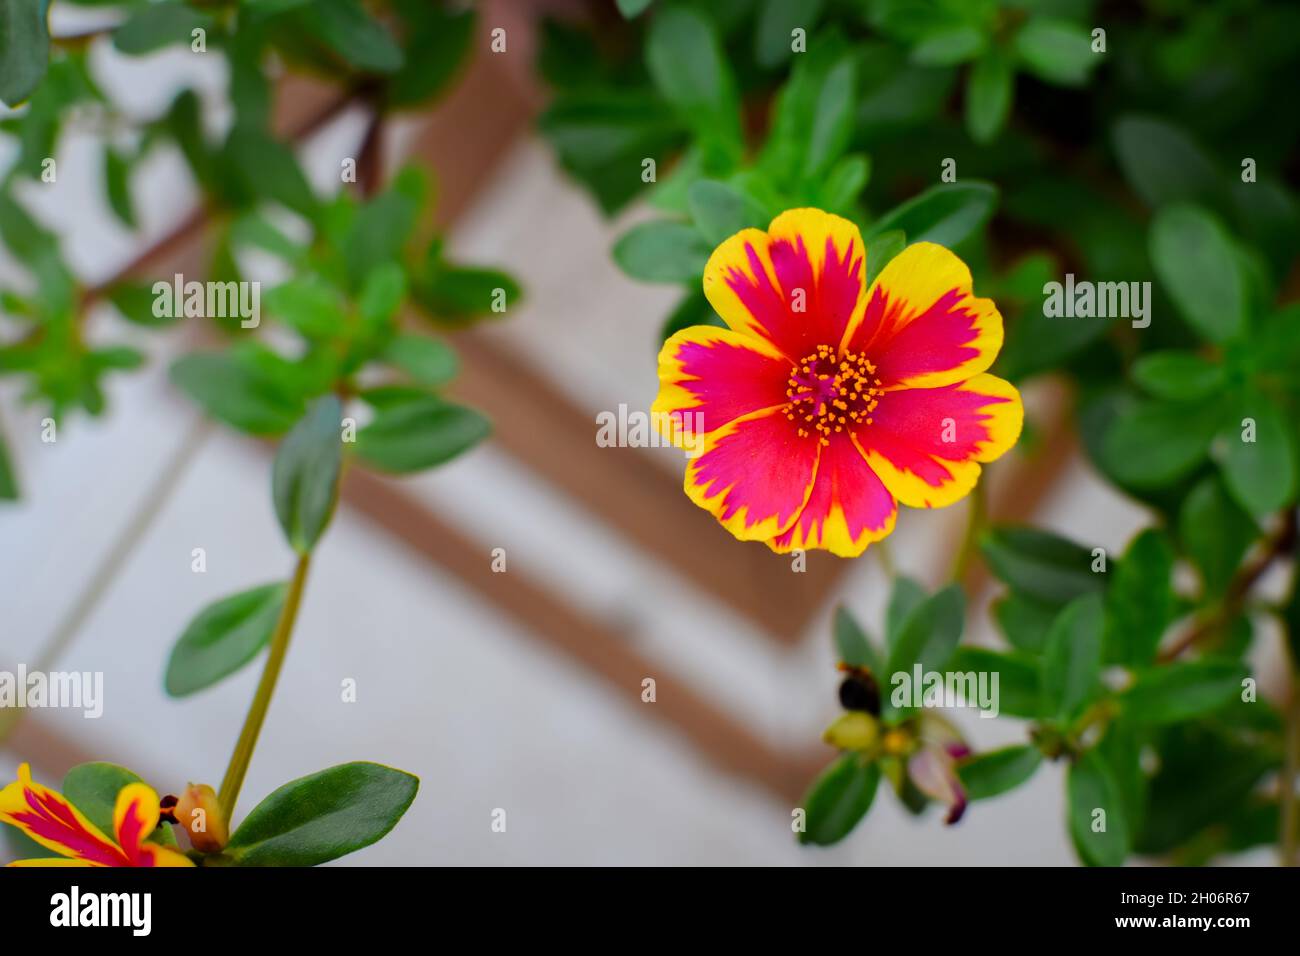 Beautiful office time flower with leaves. Used selective focus. Stock Photo